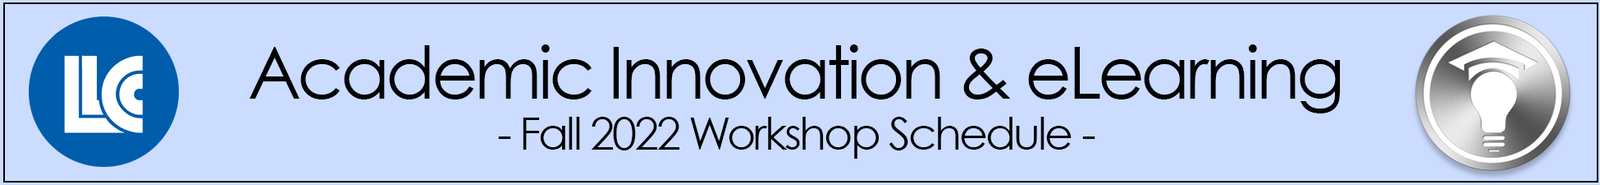 Academic Innovation and eLearning Fall 2022 Workshop Schedule